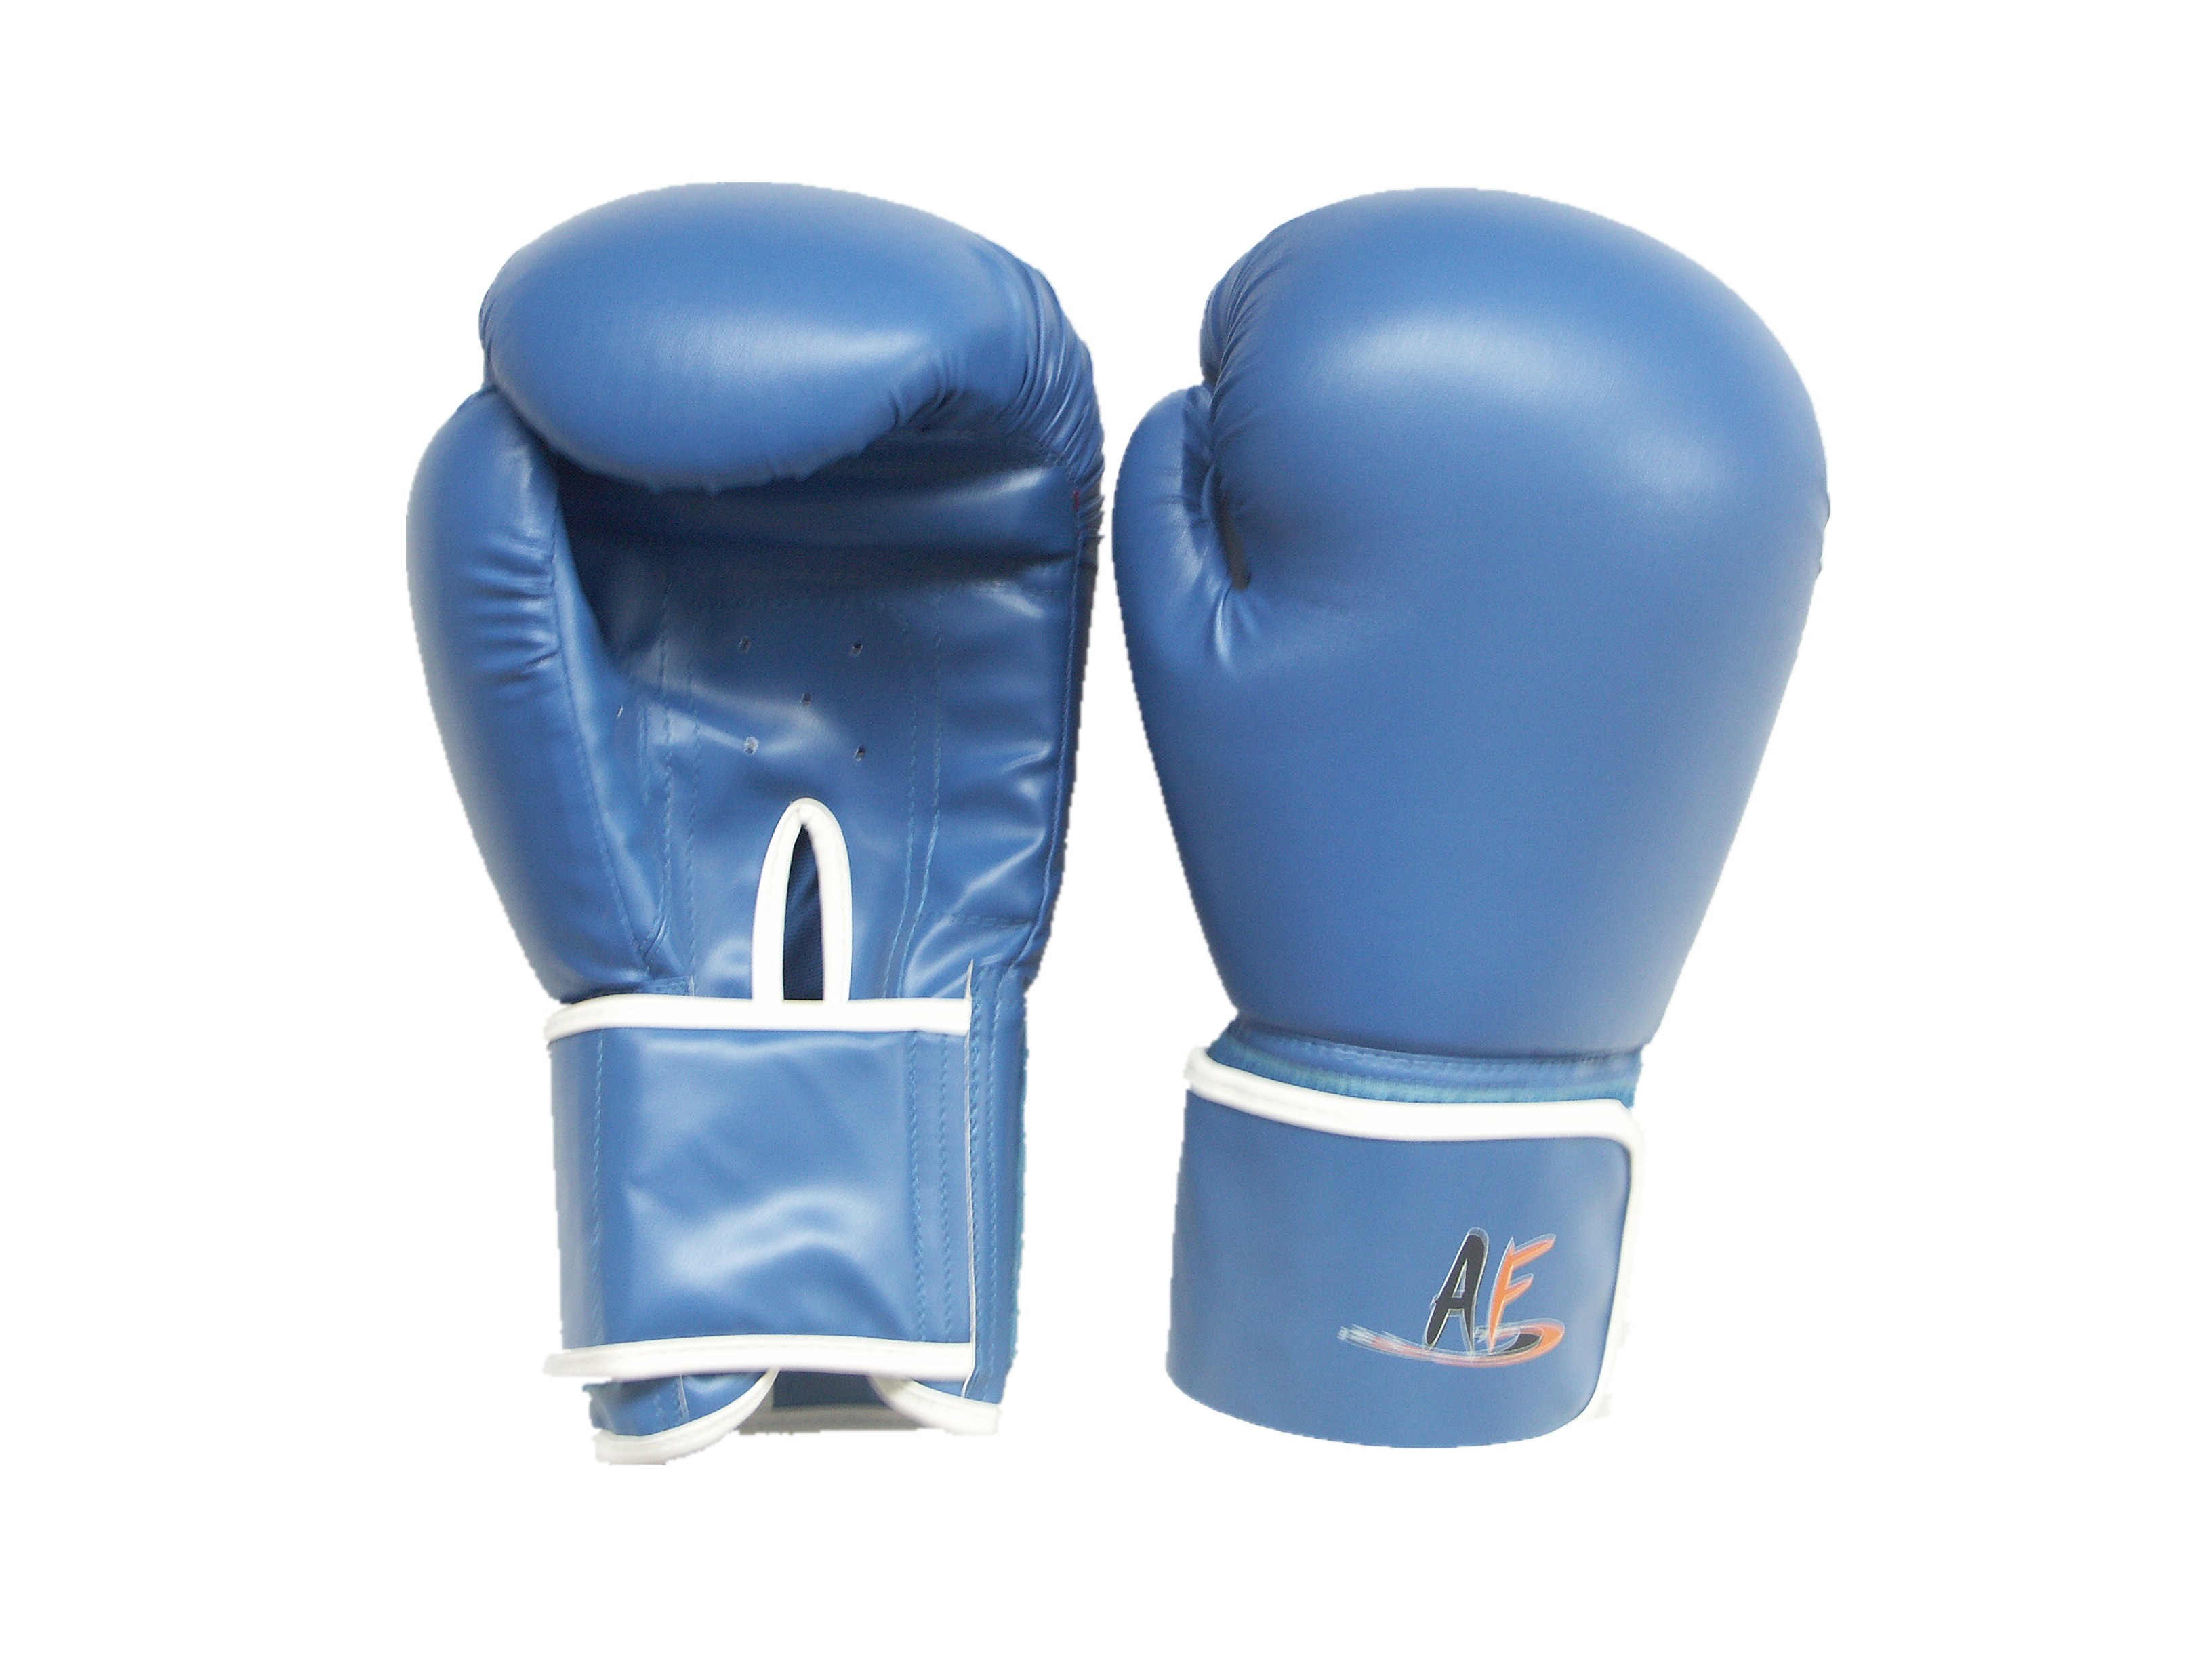 AF Boxing Practice Gloves w/Velco (8 oz, 10 oz) - Absolute Force ...